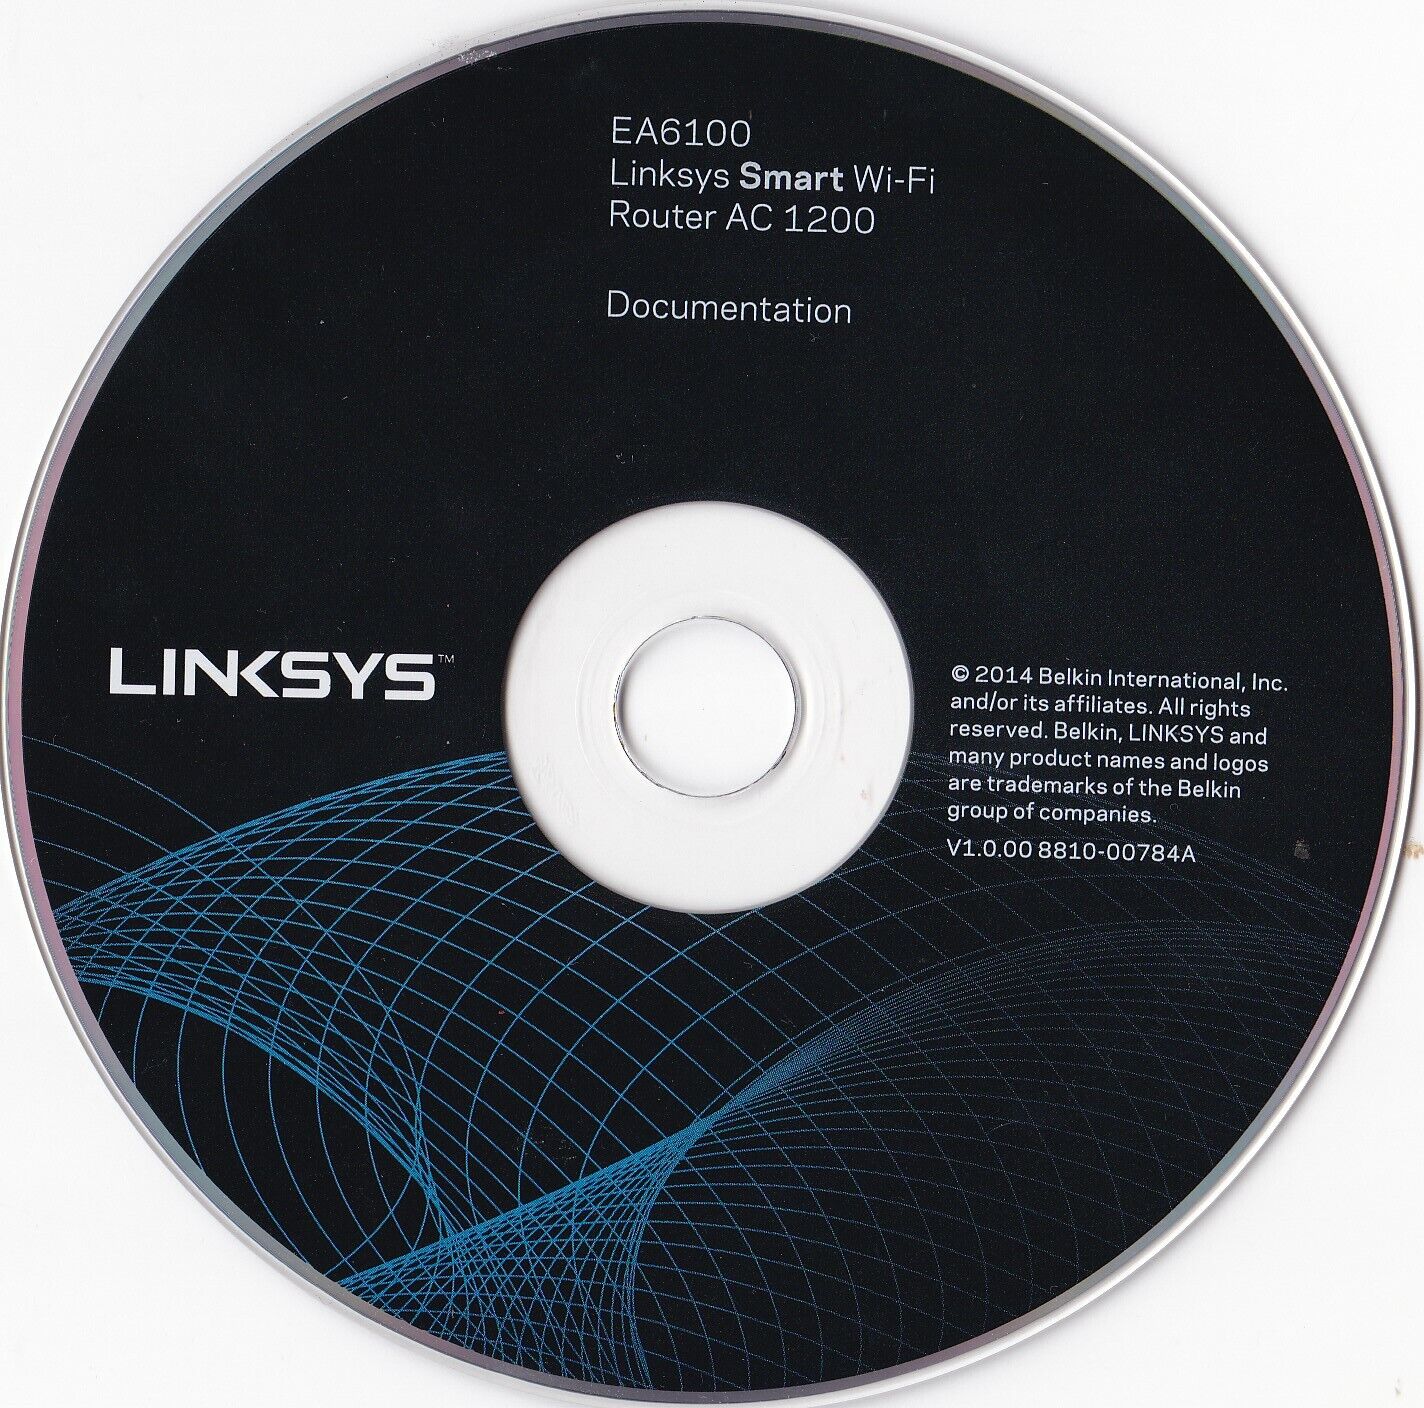 Linksys Smart Wi-Fi Router AC 1200 - Documentation (2014) *DISC ONLY*